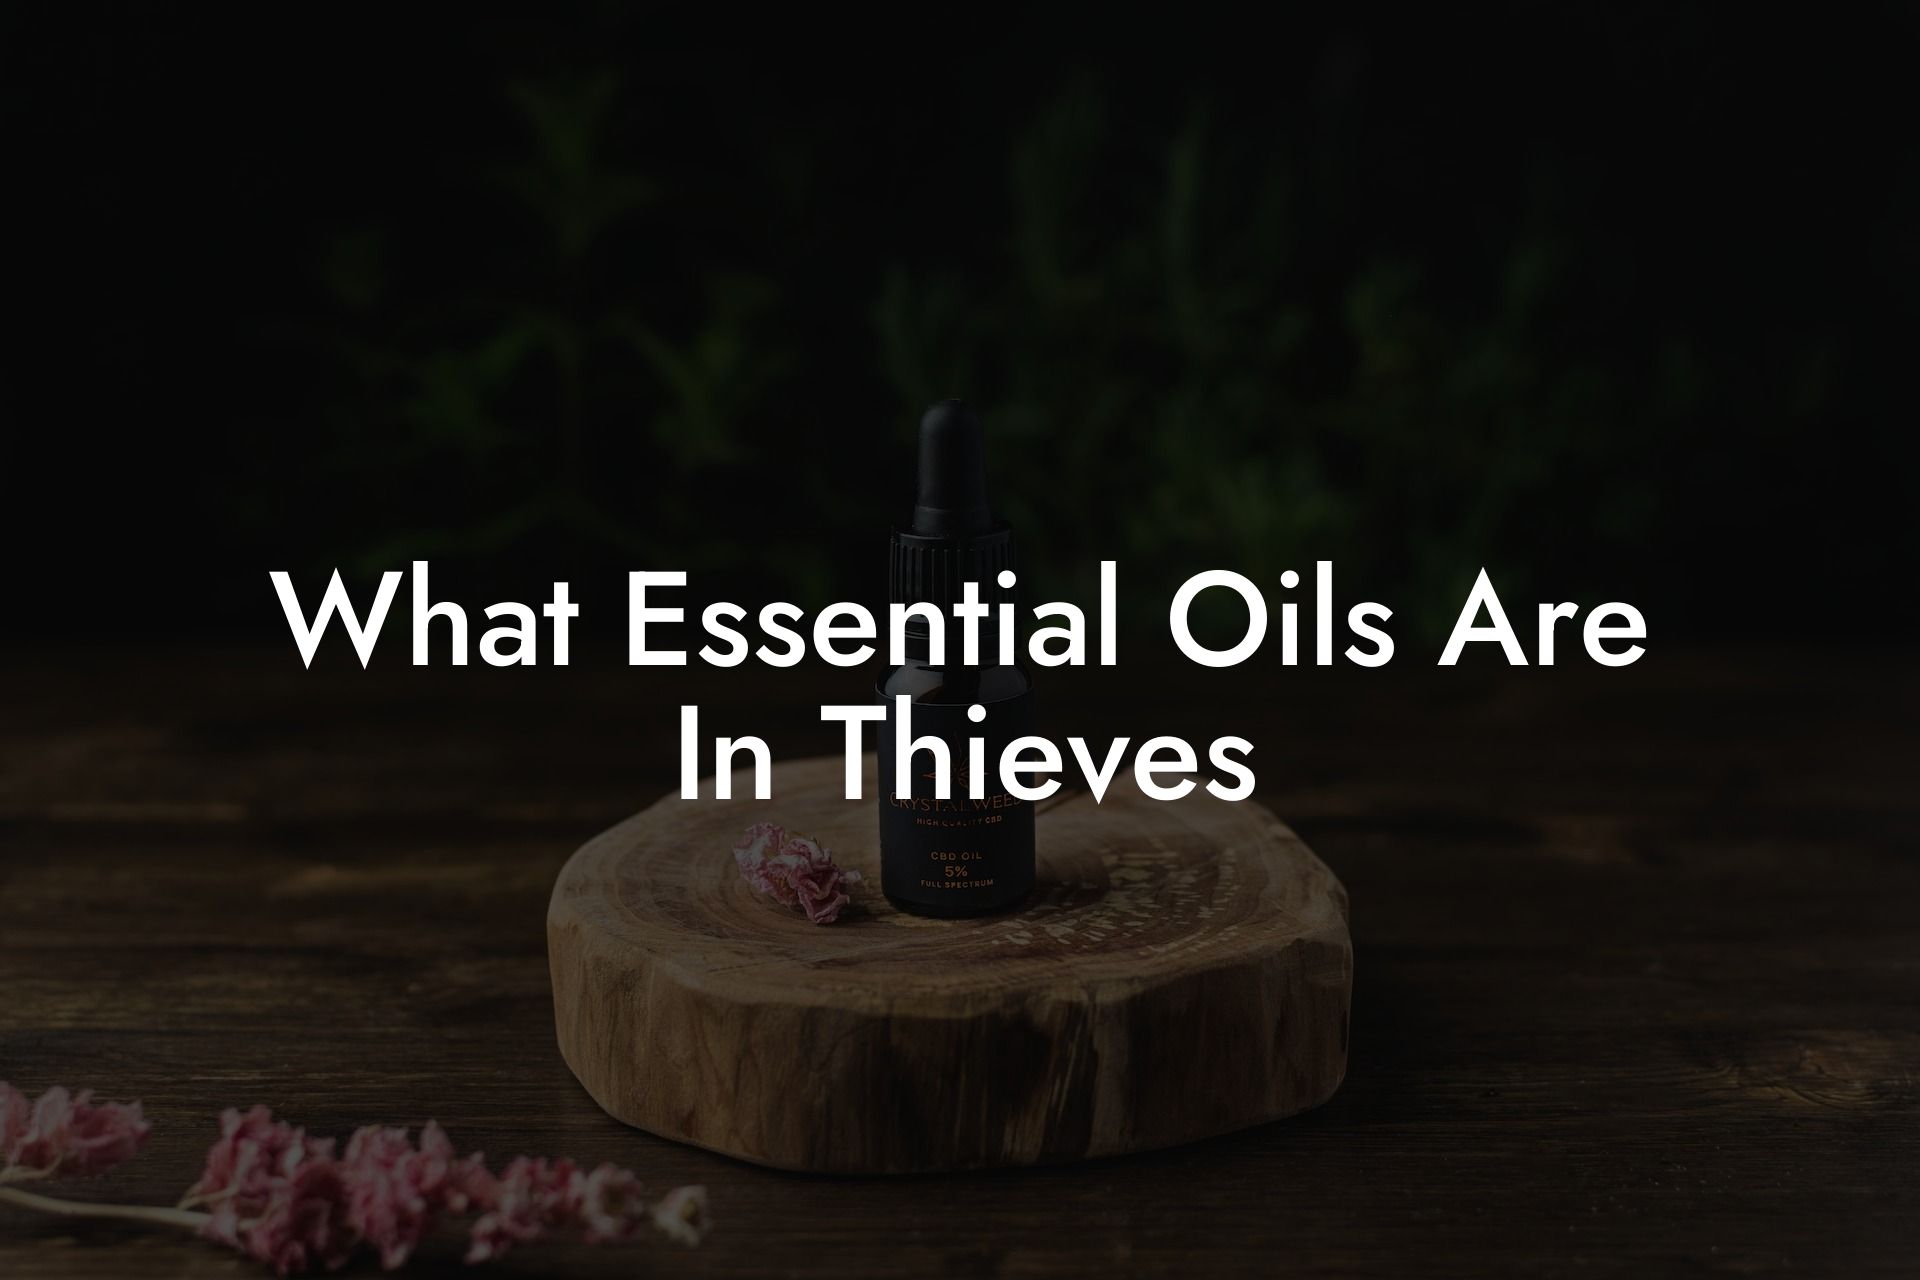 What Essential Oils Are In Thieves